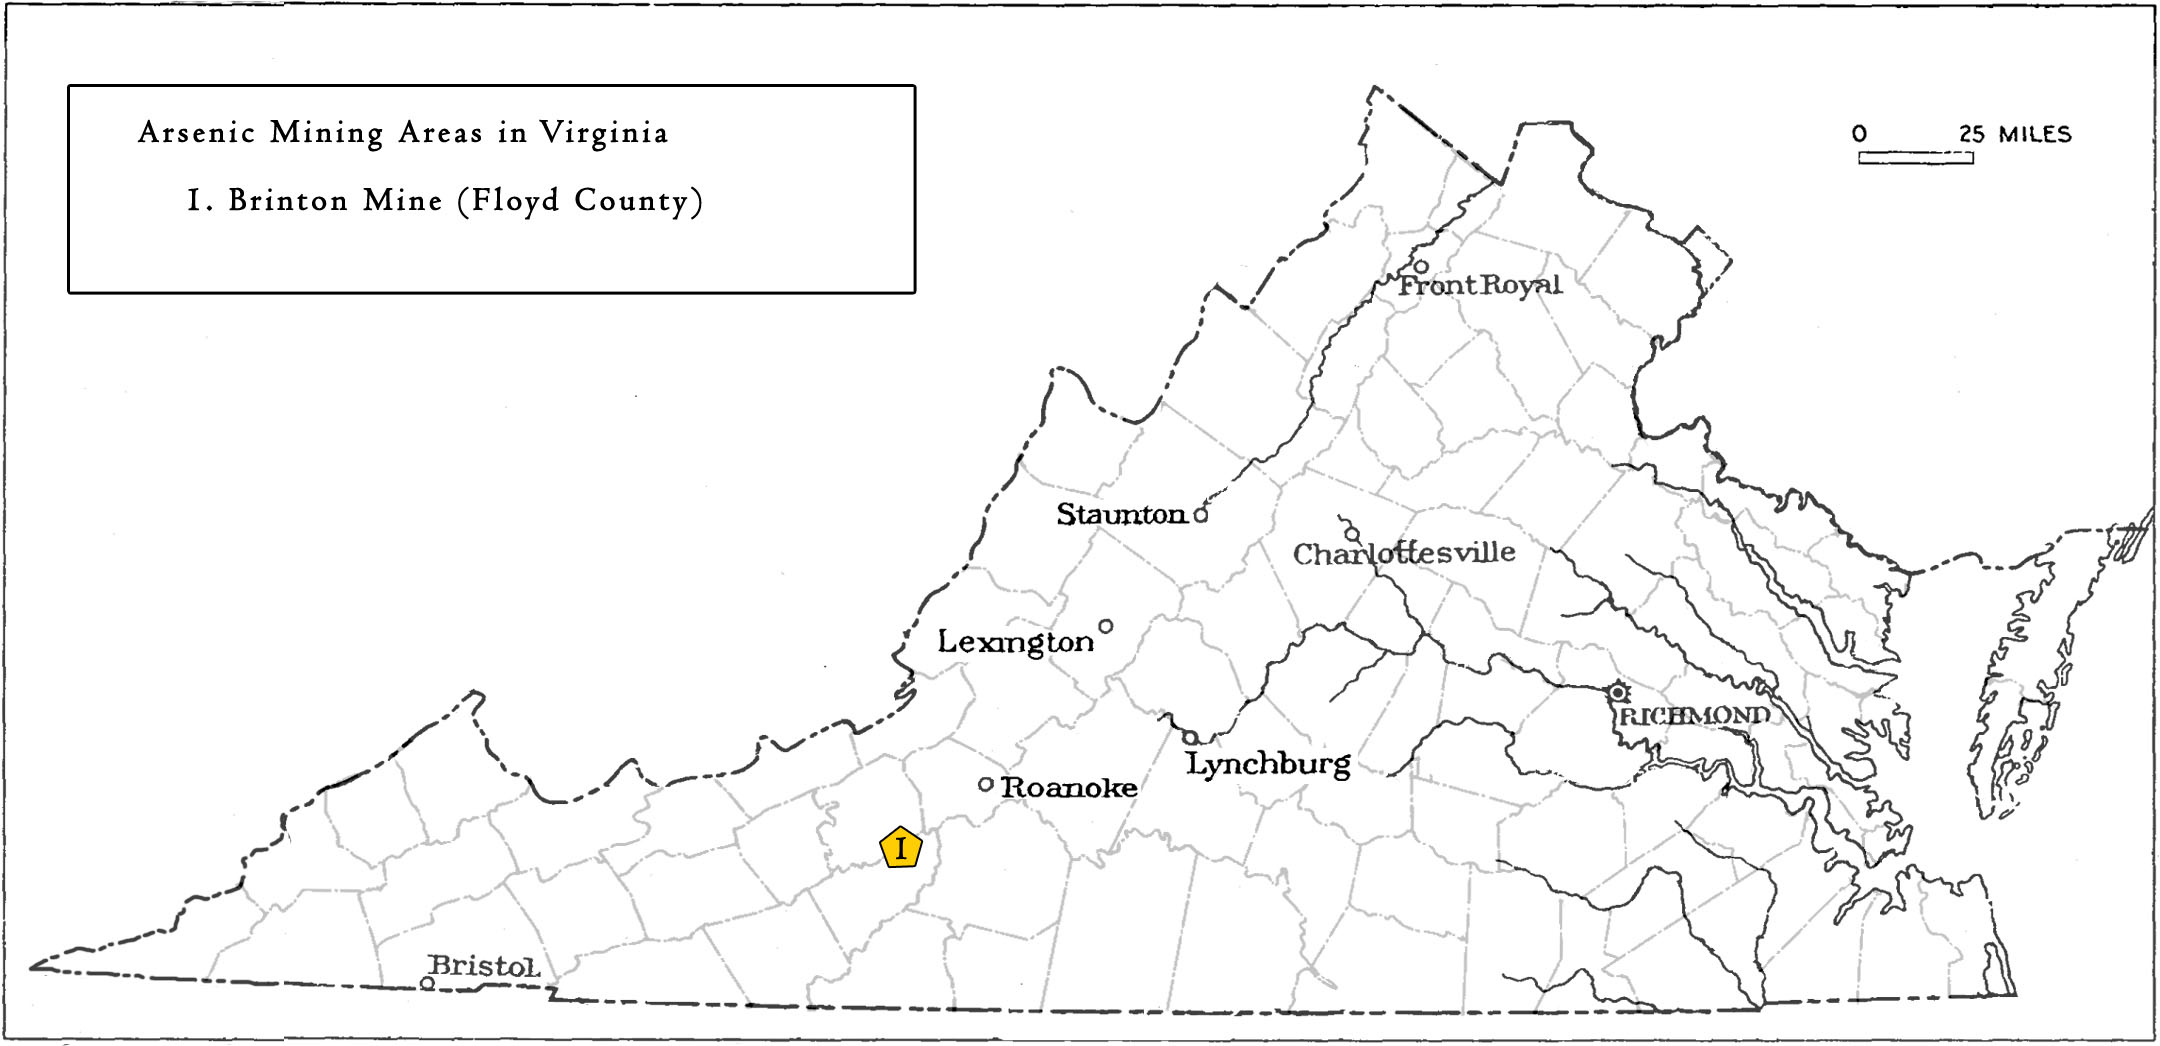 Locations in Virginia mined or prospected for Arsenic